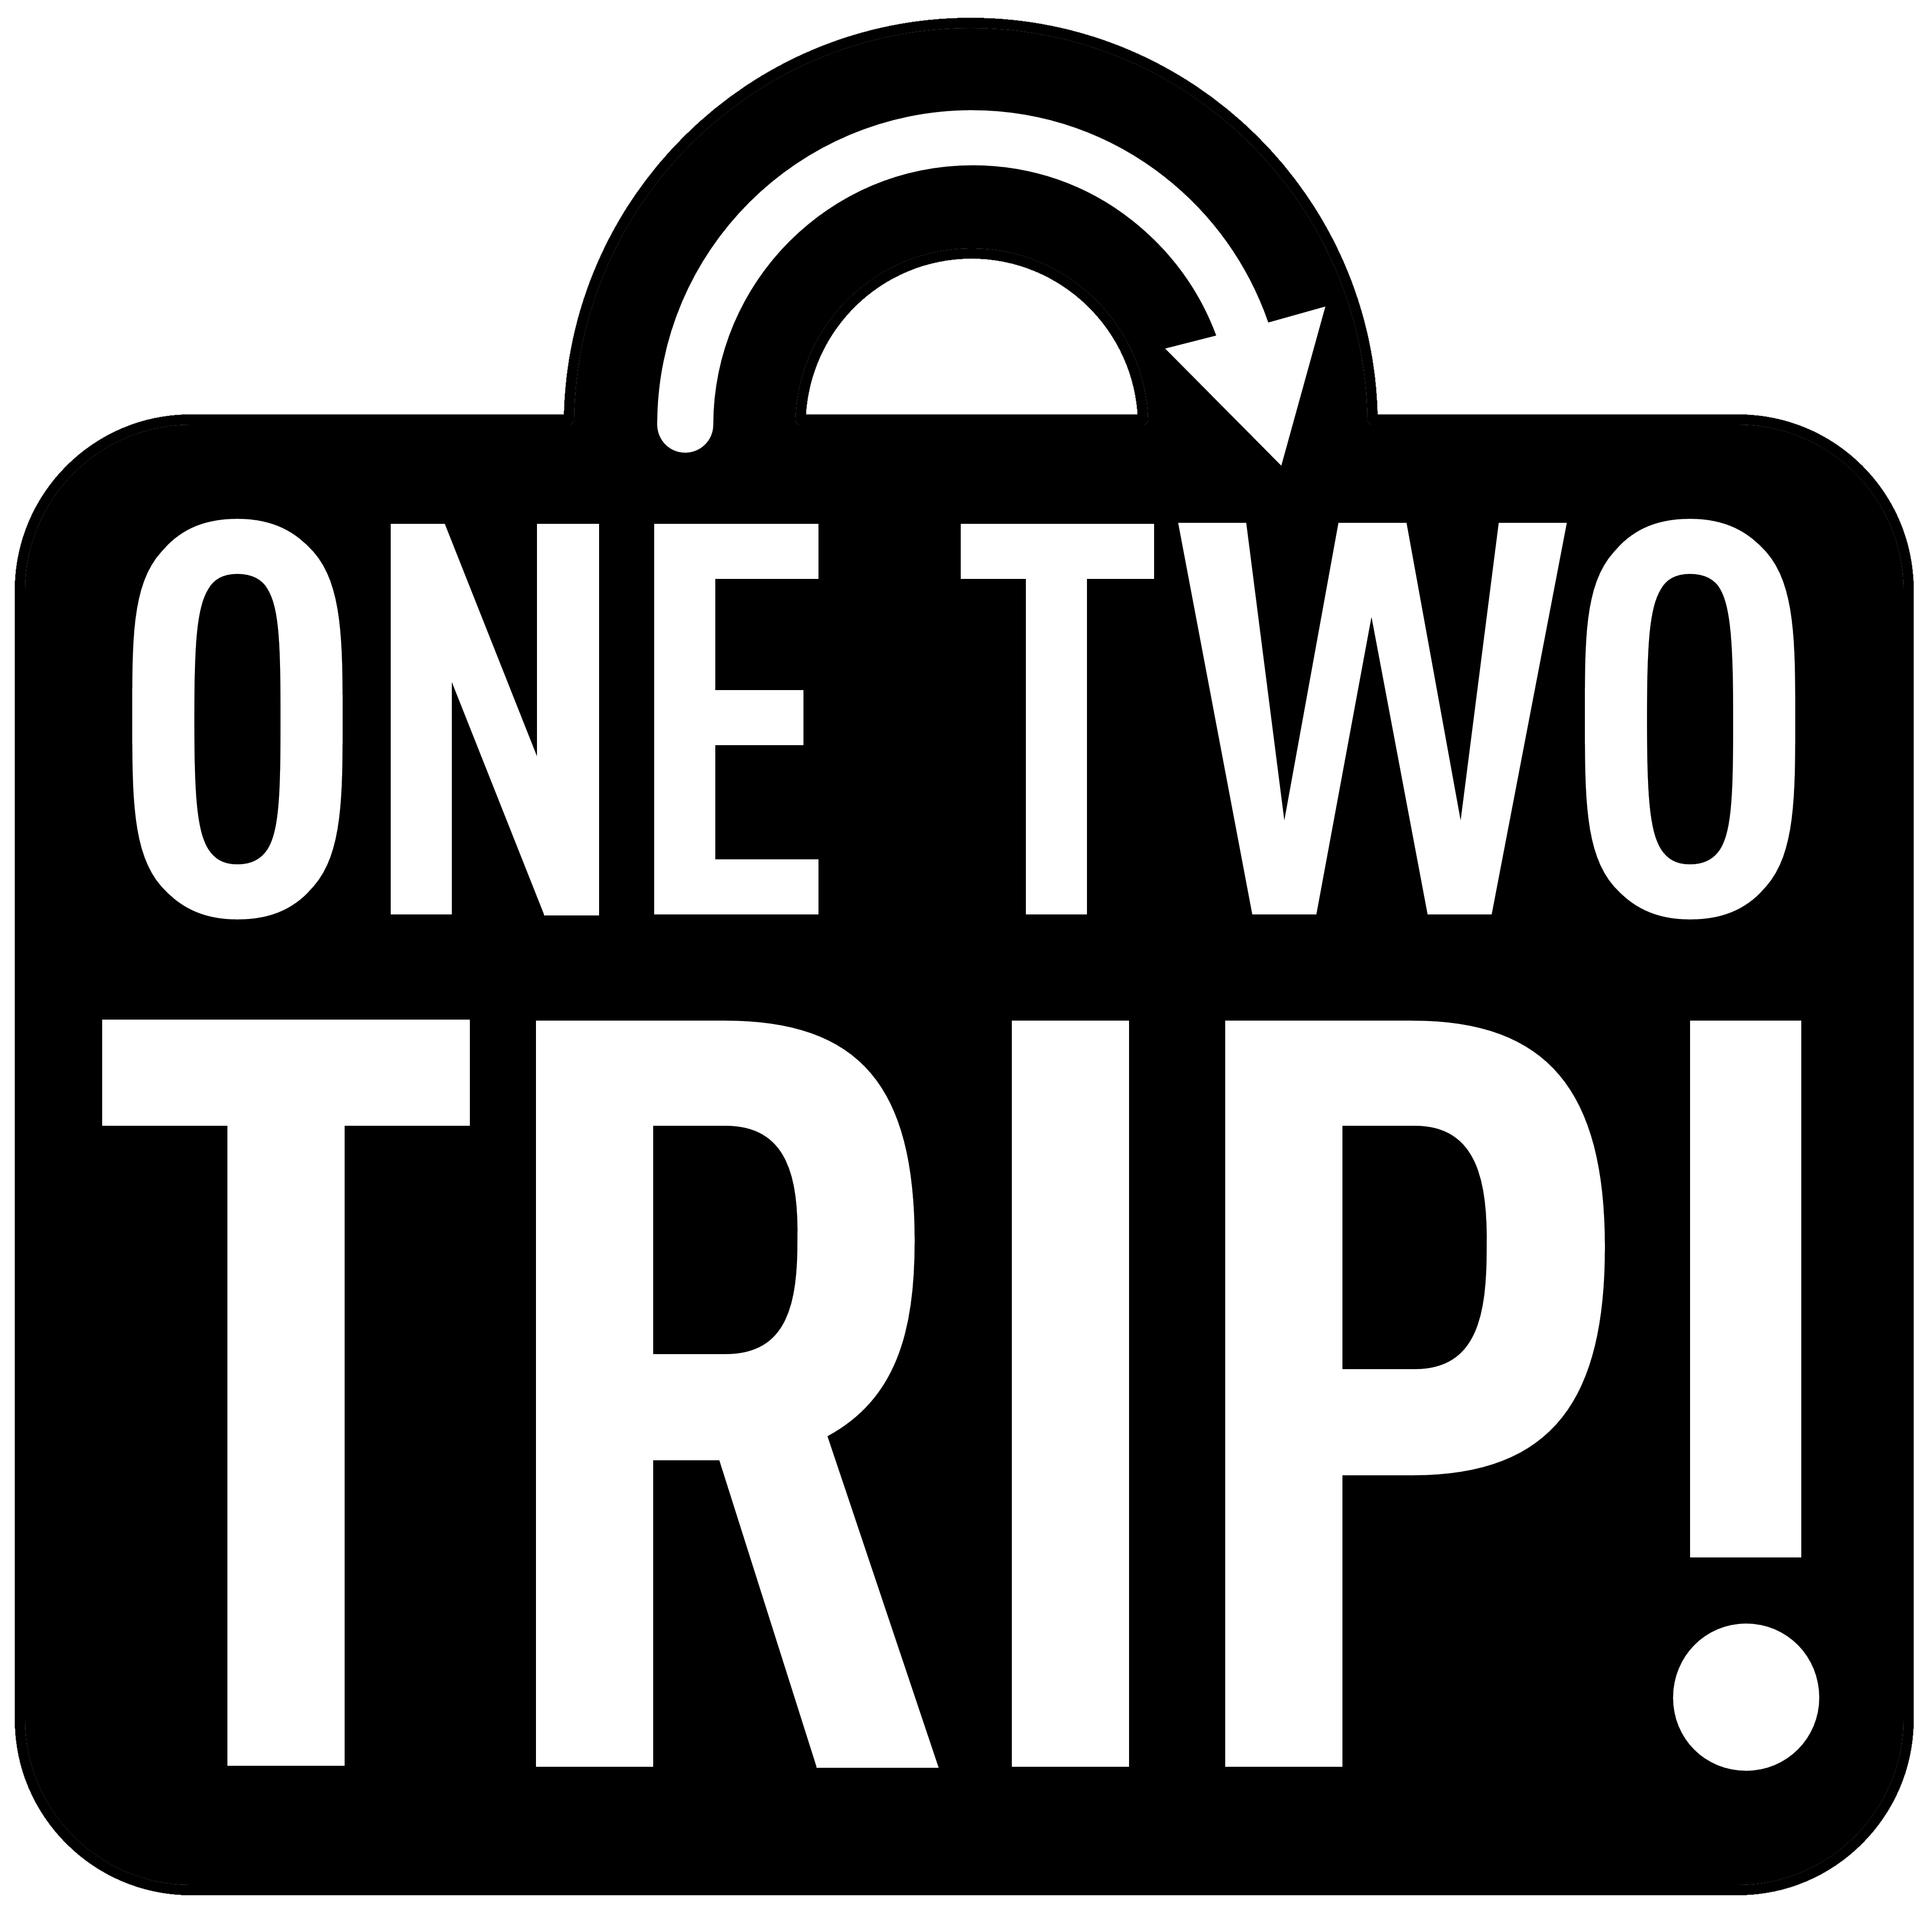 Сайт onetwotrip com. ONETWOTRIP. ONETWOTRIP logo. One two trip. ONETWOTRIP.com.